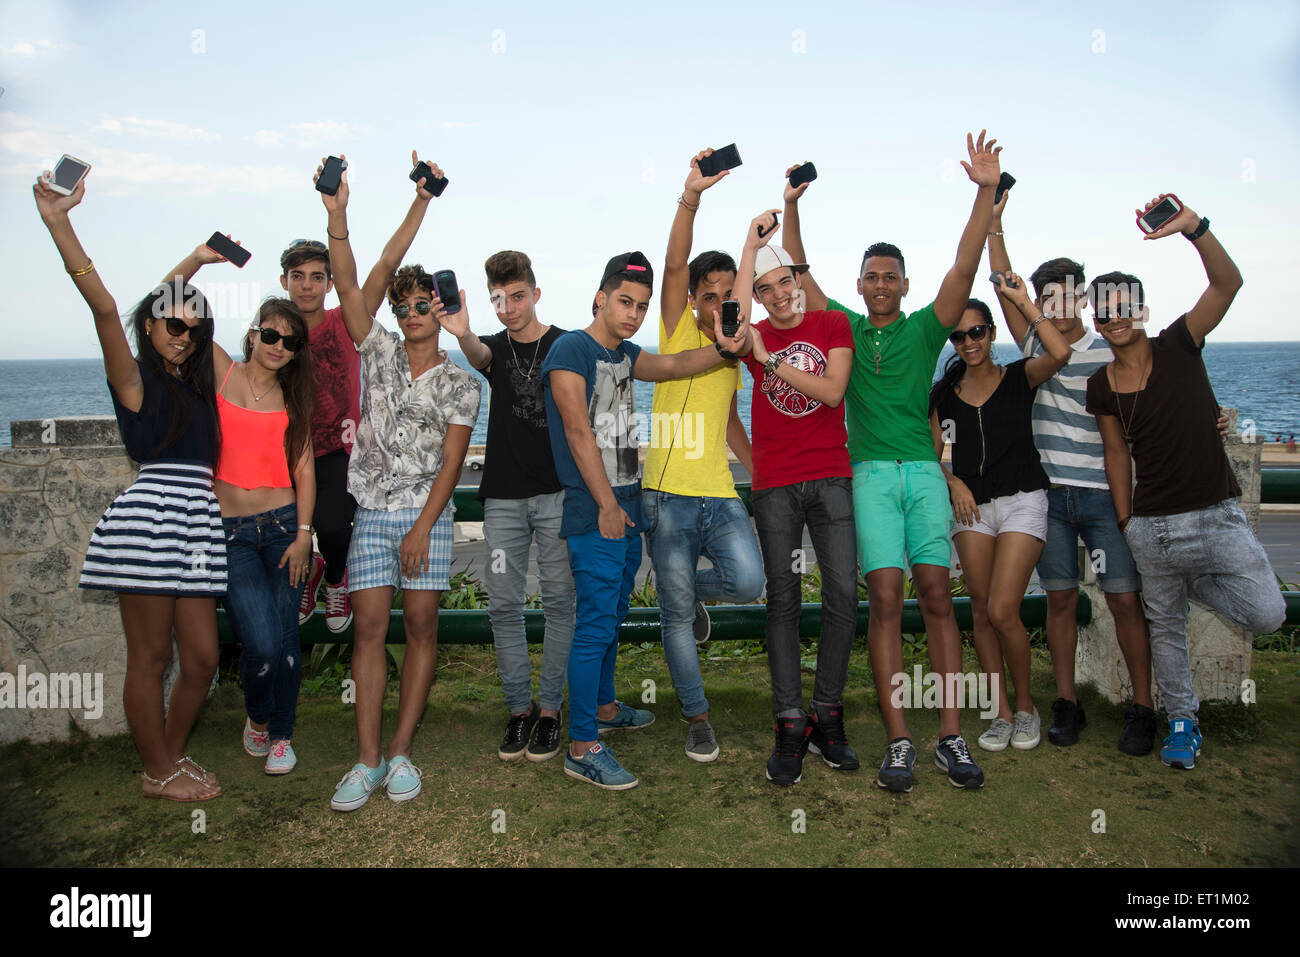 Group of young people having fun with mobile phones Stock Photo